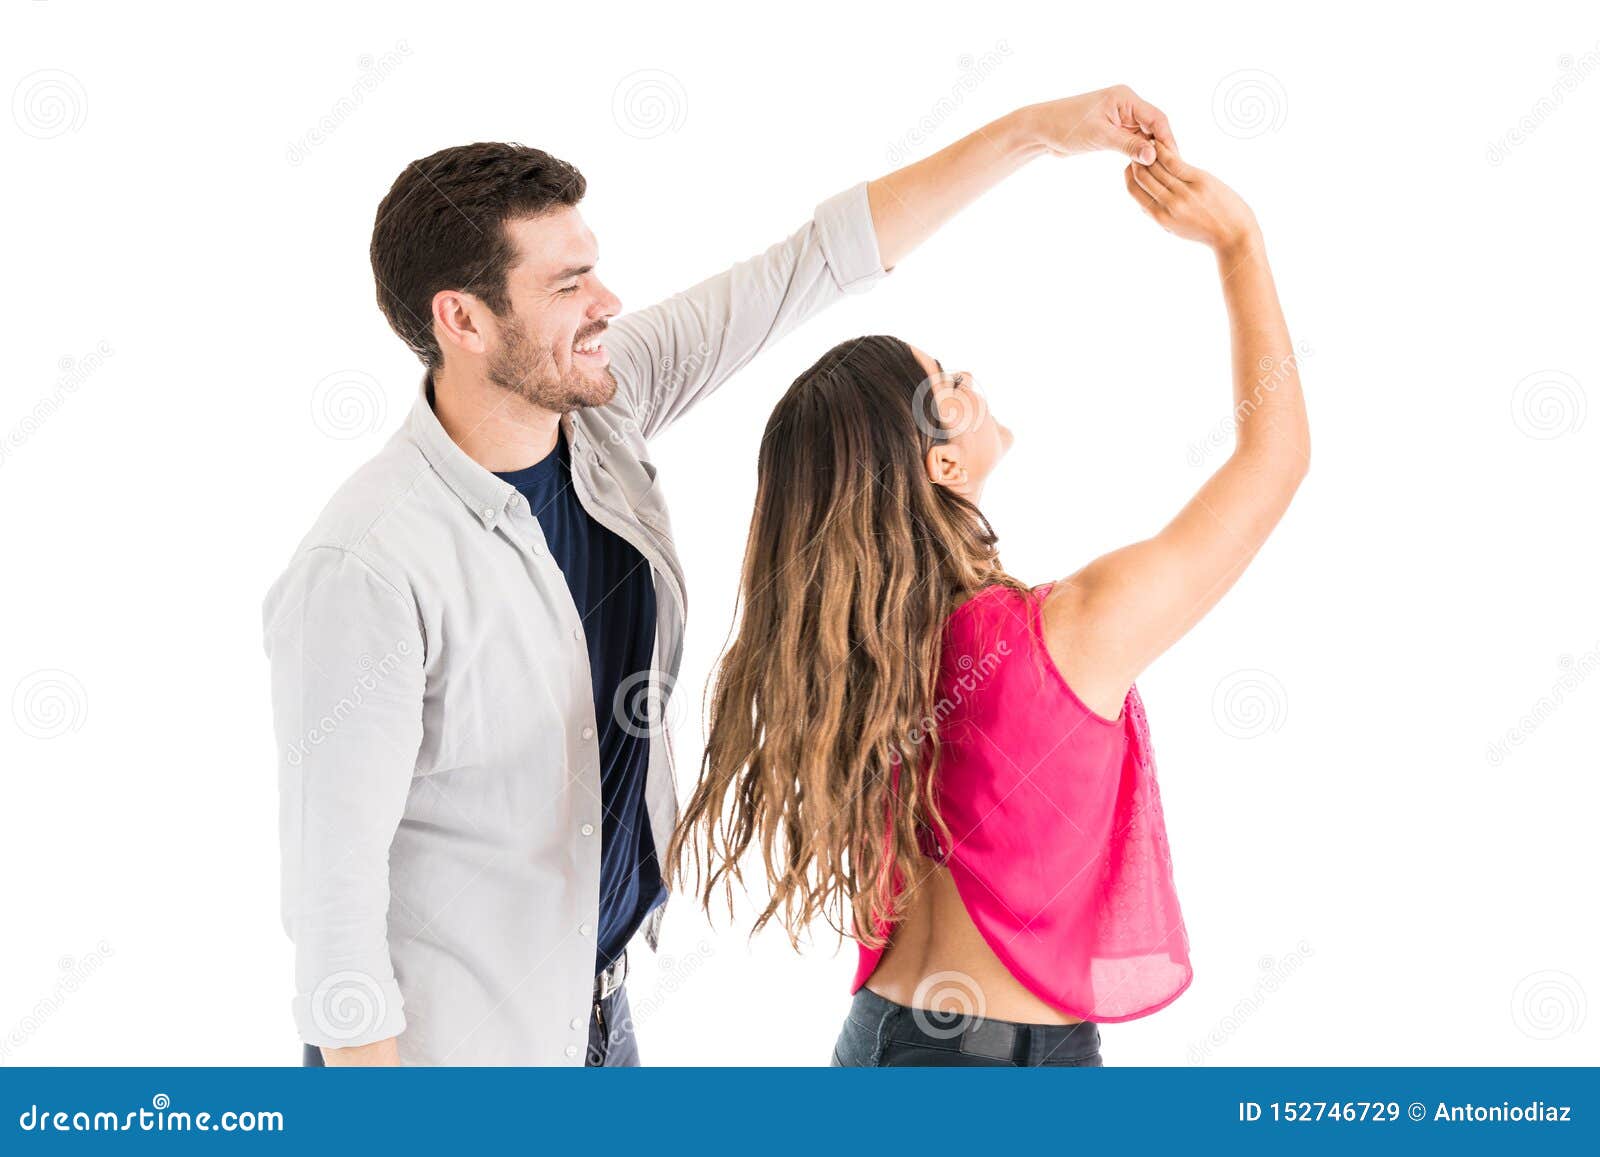 Young Man Spinning Woman Against White Background Stock Image